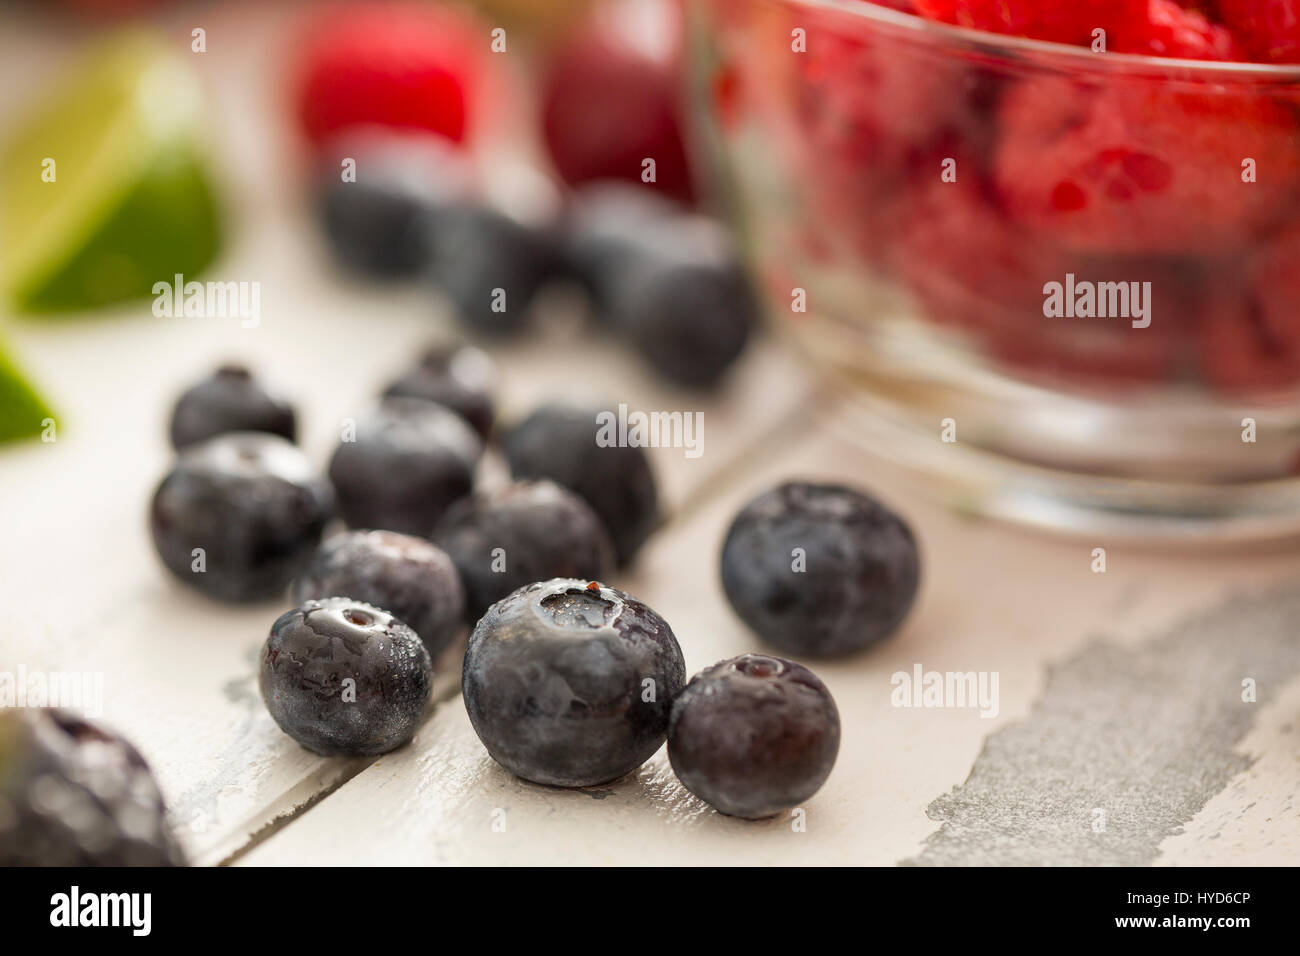 Close-up of blueberries Stock Photo